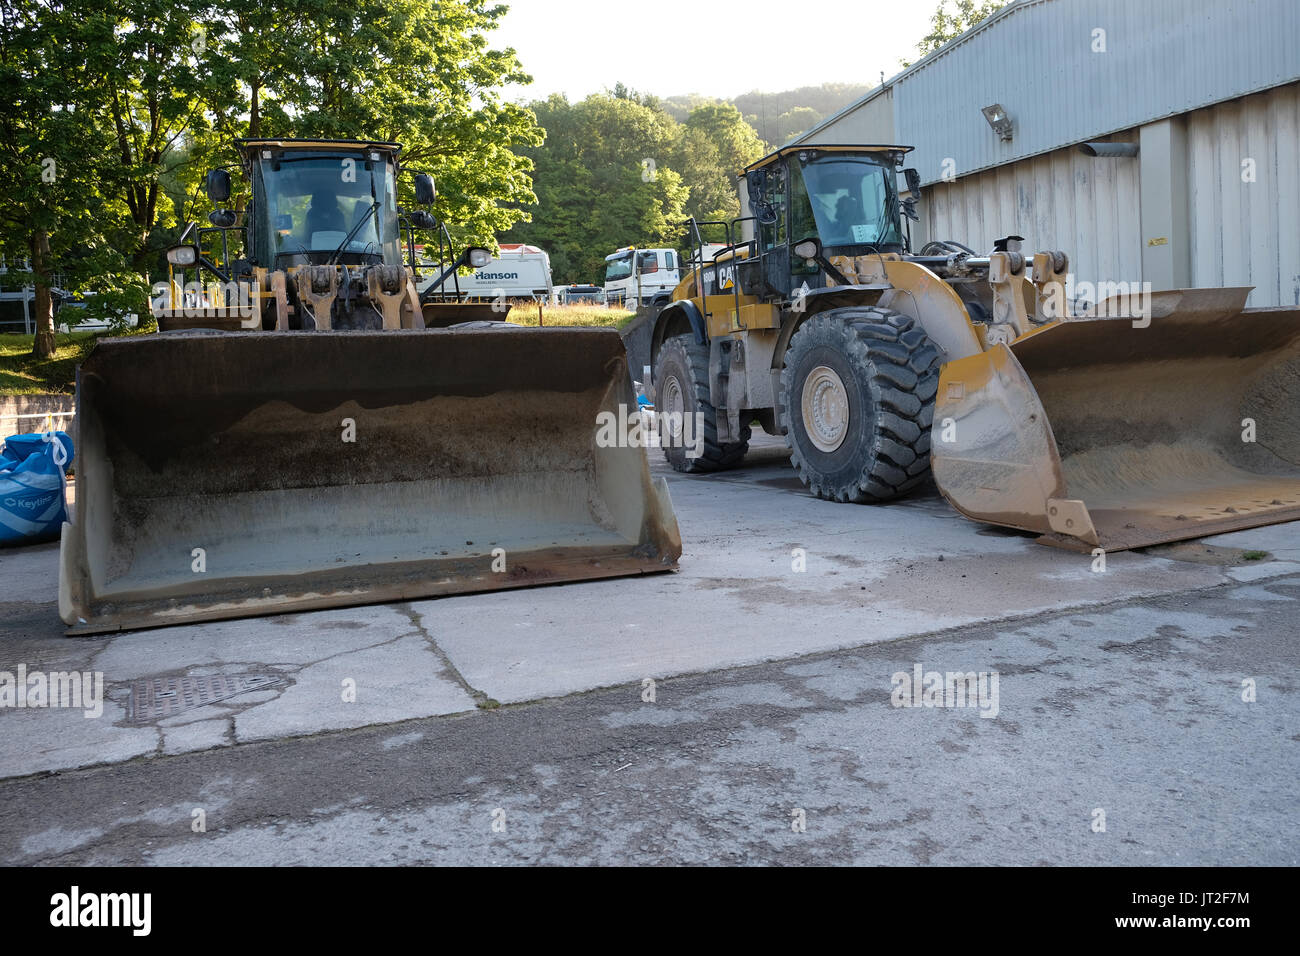 6th August 2017 - Large front end loader shovels parked up at the weekend Stock Photo